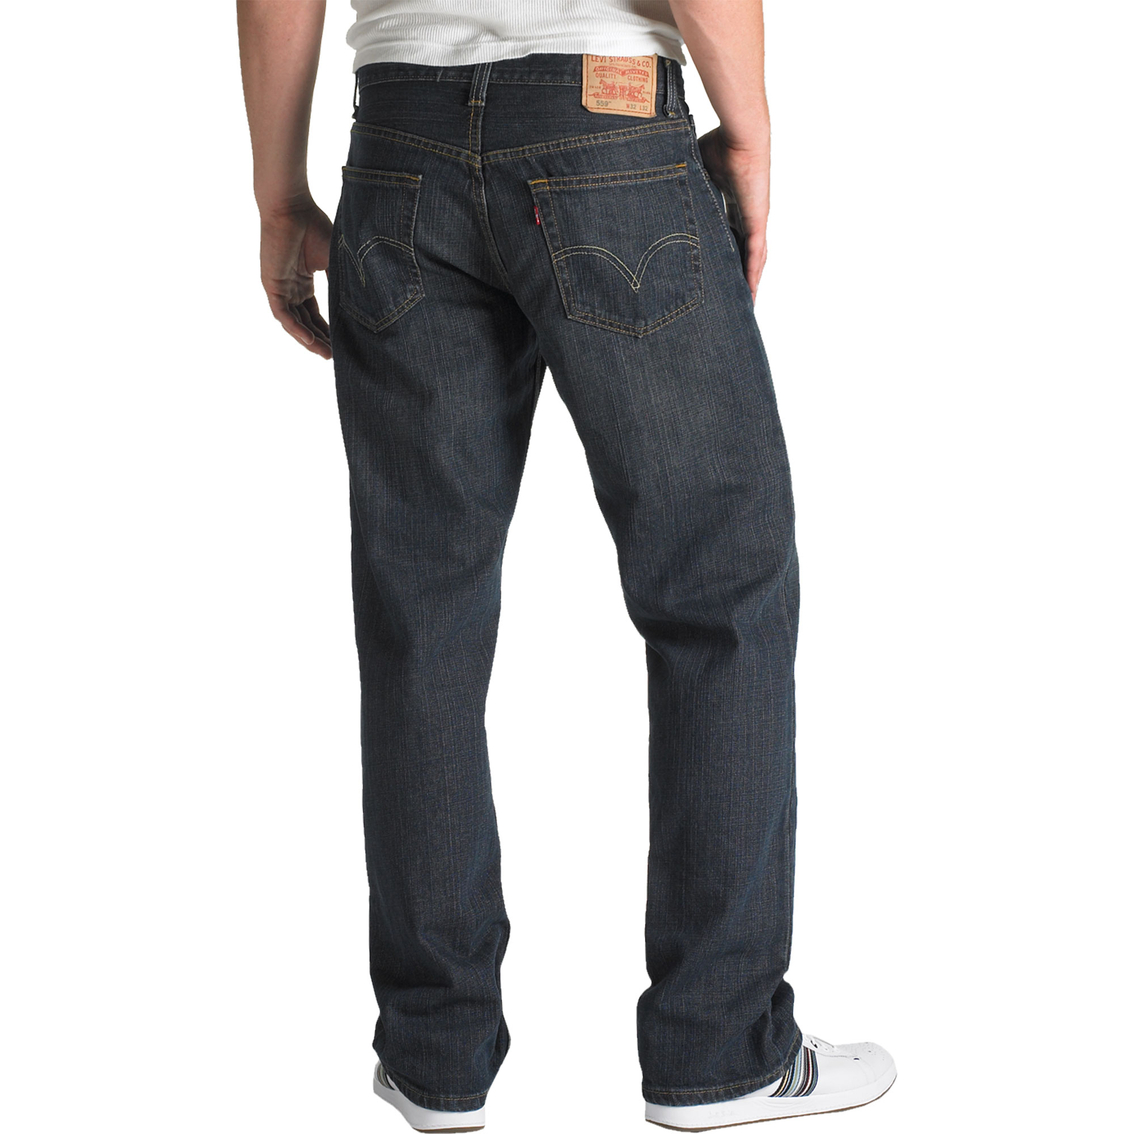 Levi's 559 Relaxed Straight Fit Jeans - Image 2 of 2